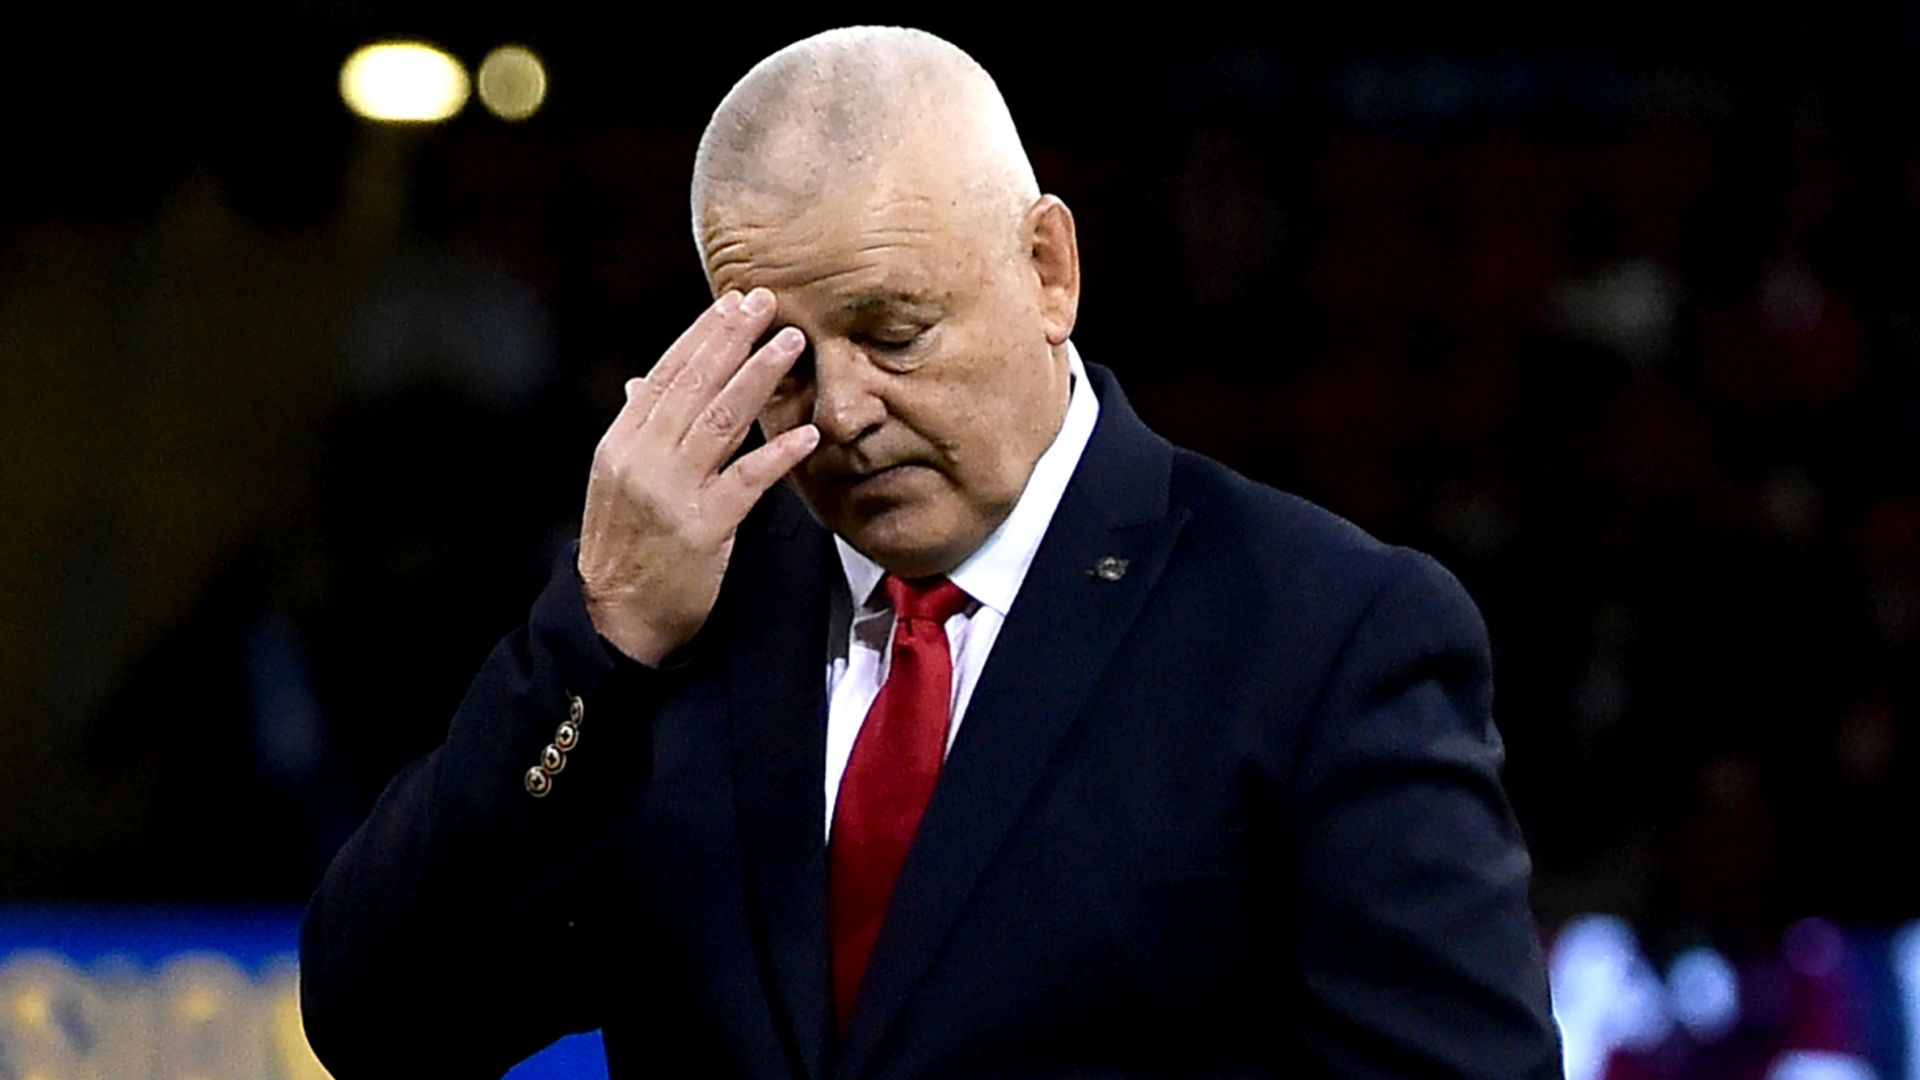 Gatland: If I'd known Wales' problems, I'd have gone elsewhere